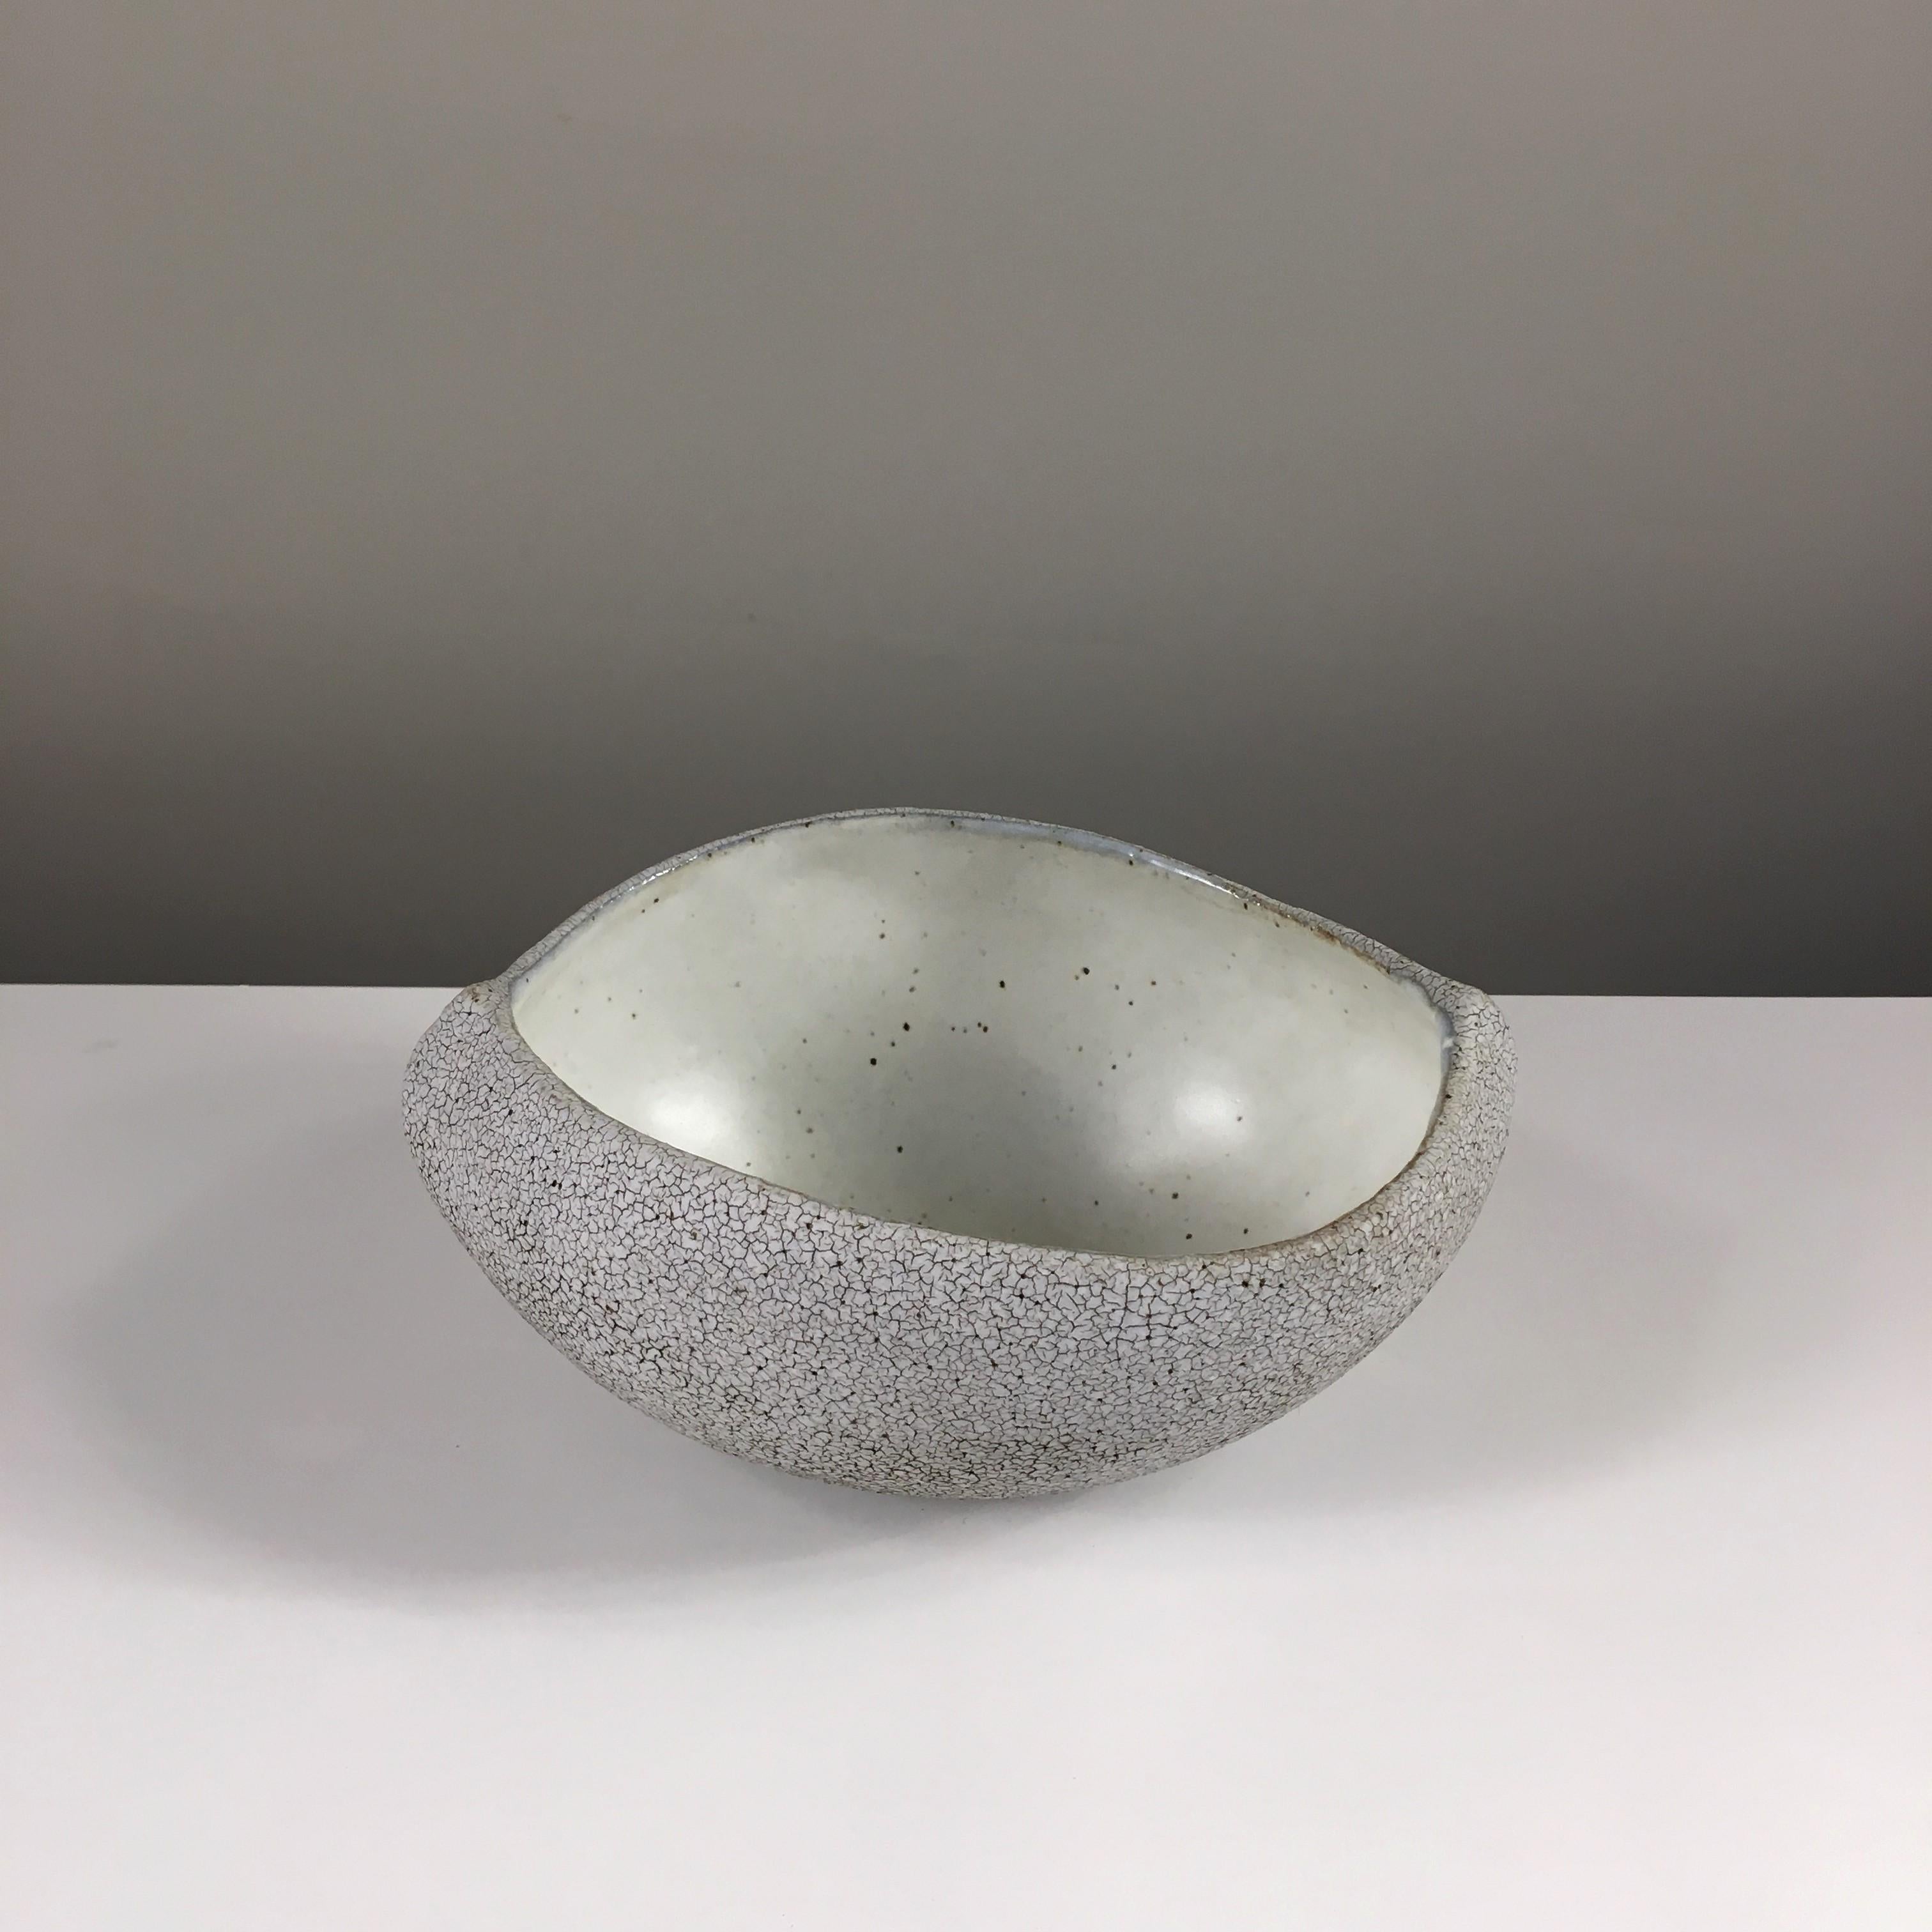 Boat Shaped Bowl with Inner Light Grey Glaze and Silvery Outer Texture by Yumiko Kuga. 
Dimensions: W 7.5